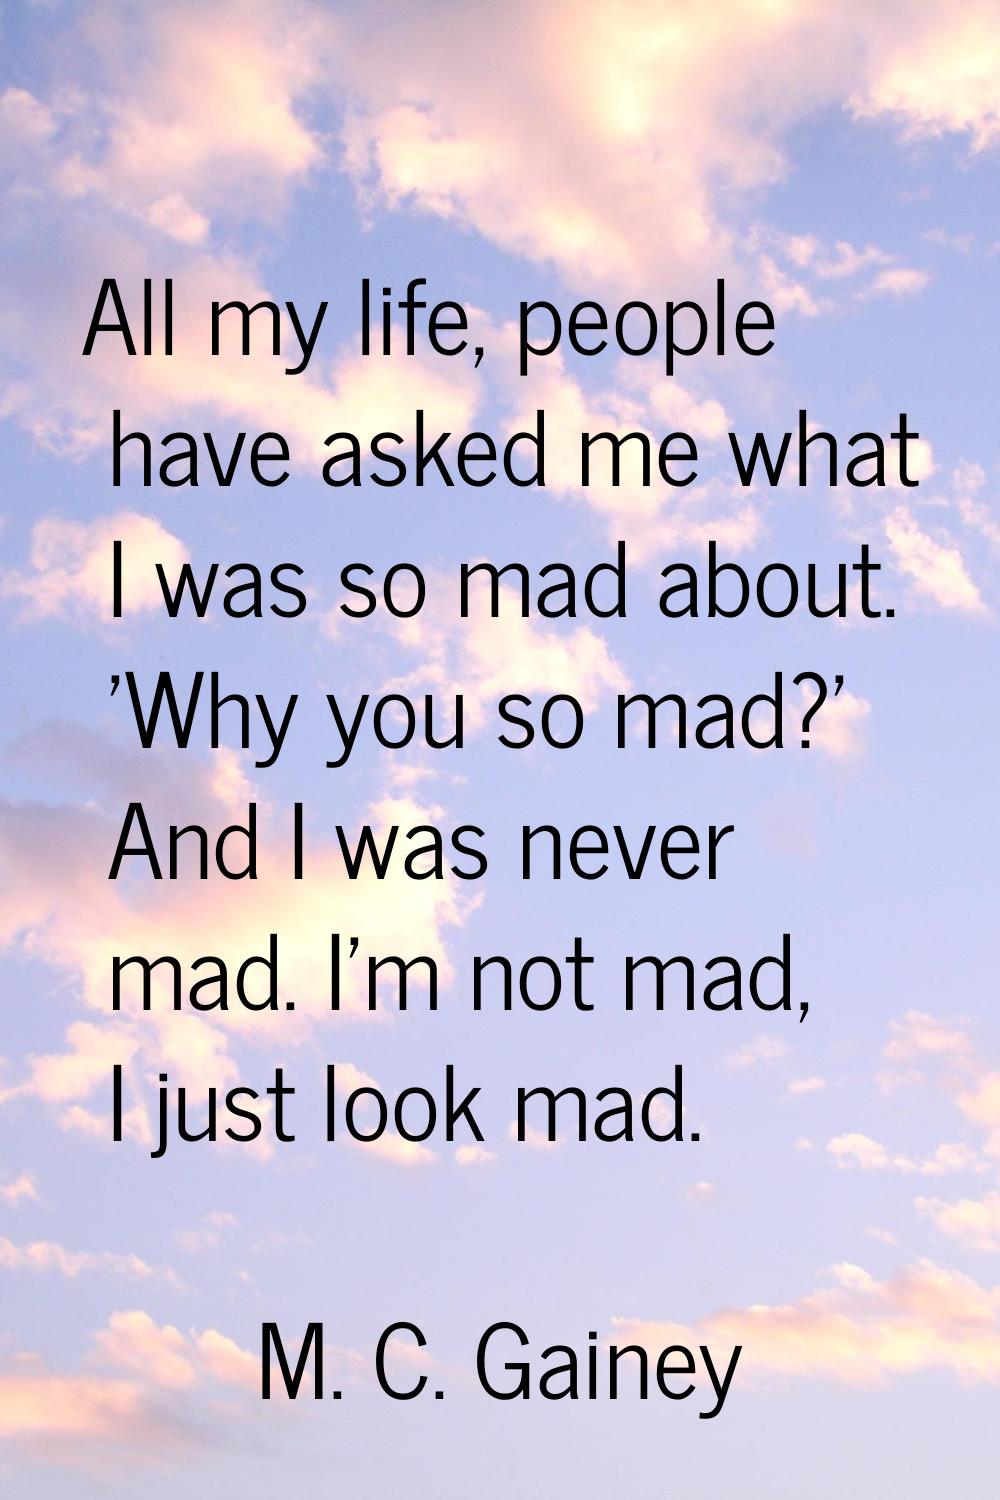 All my life, people have asked me what I was so mad about. 'Why you so mad?' And I was never mad. I